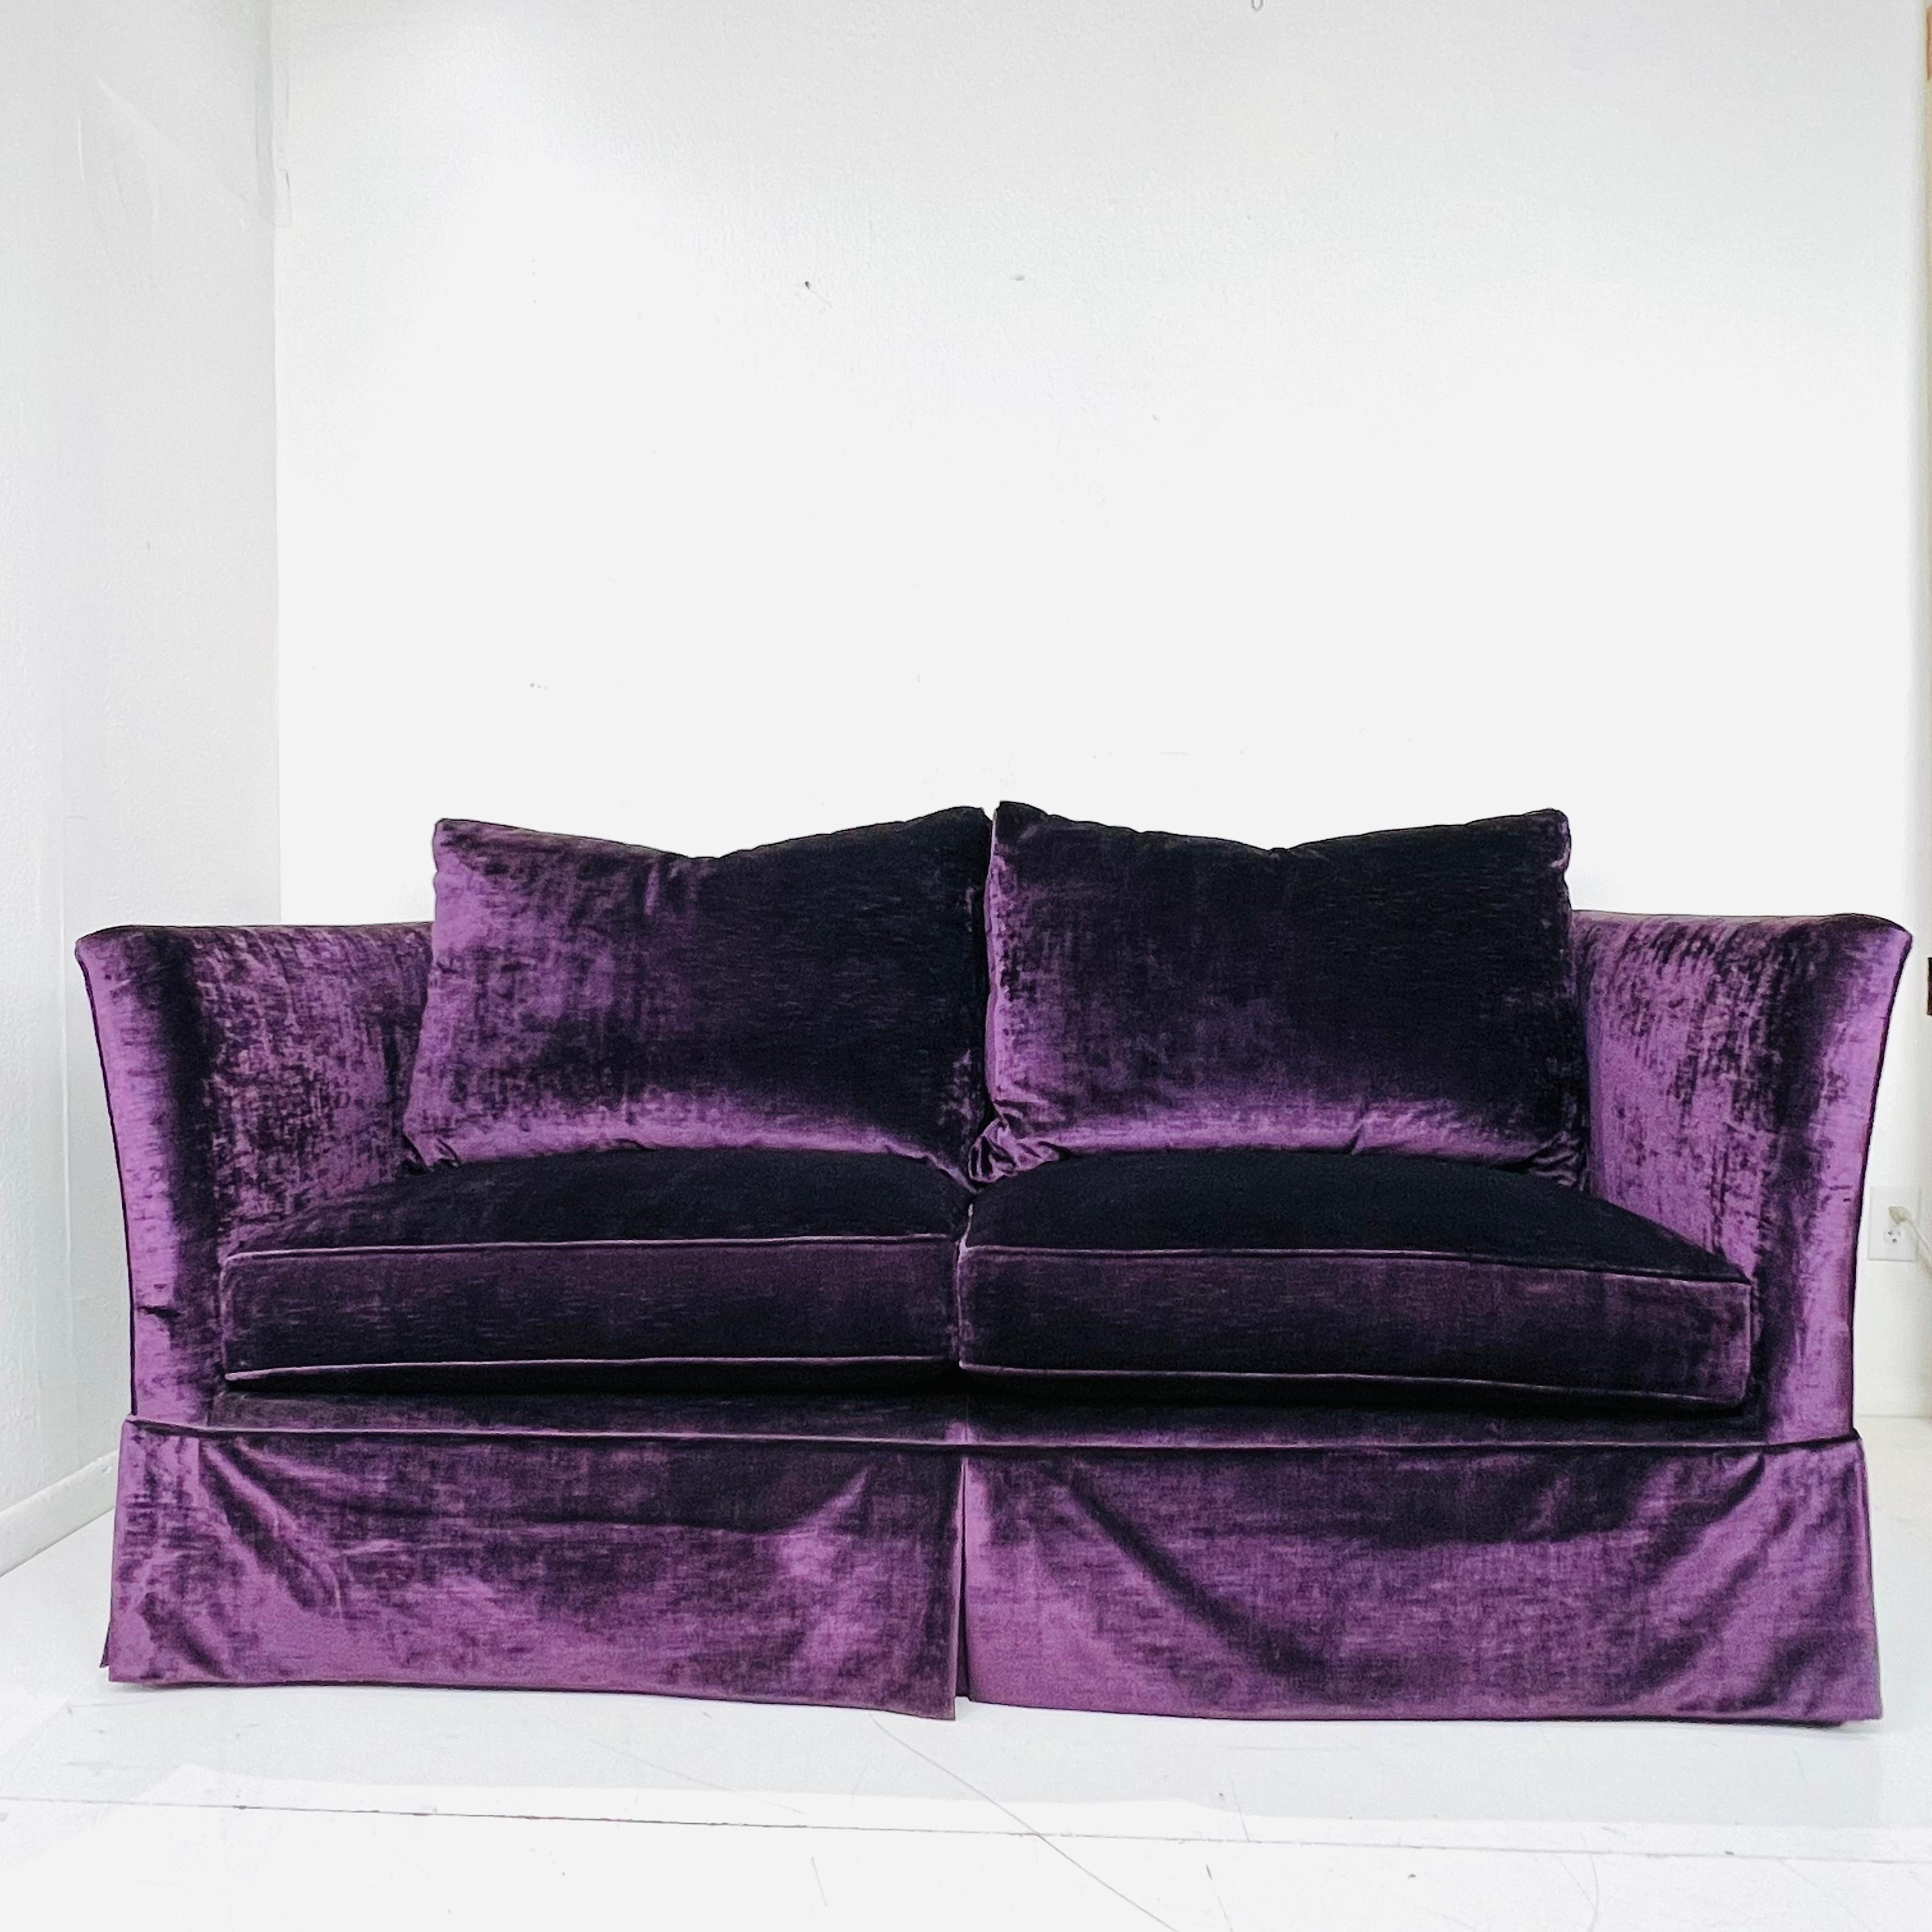 Breathtaking custom skirted sofa by Ralph Lauren, circa mid-90s. Bold royal purple chenille velvet upholstery in excellent condition. Cushions are down wrapped and seats are plush and incredibly comportable. Gorgeous and one-of-a-kind! 2 available!